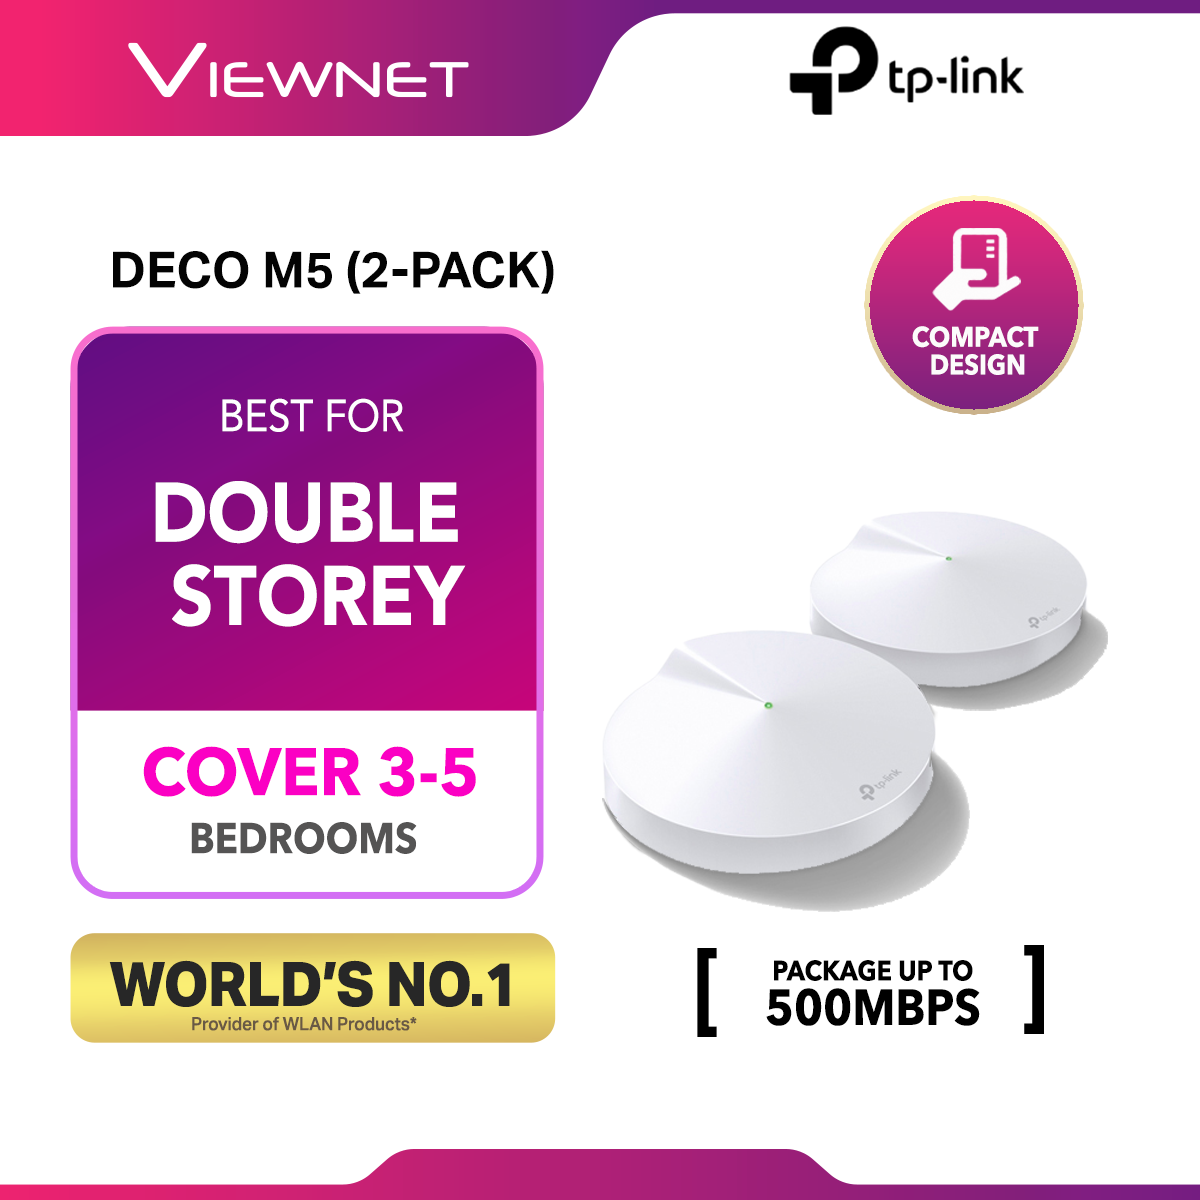 TP-Link Deco M5 (2 Pack) - AC1300 Security Protection Gigabit Whole Home Mesh WiFi Wireless Wi-Fi Router System